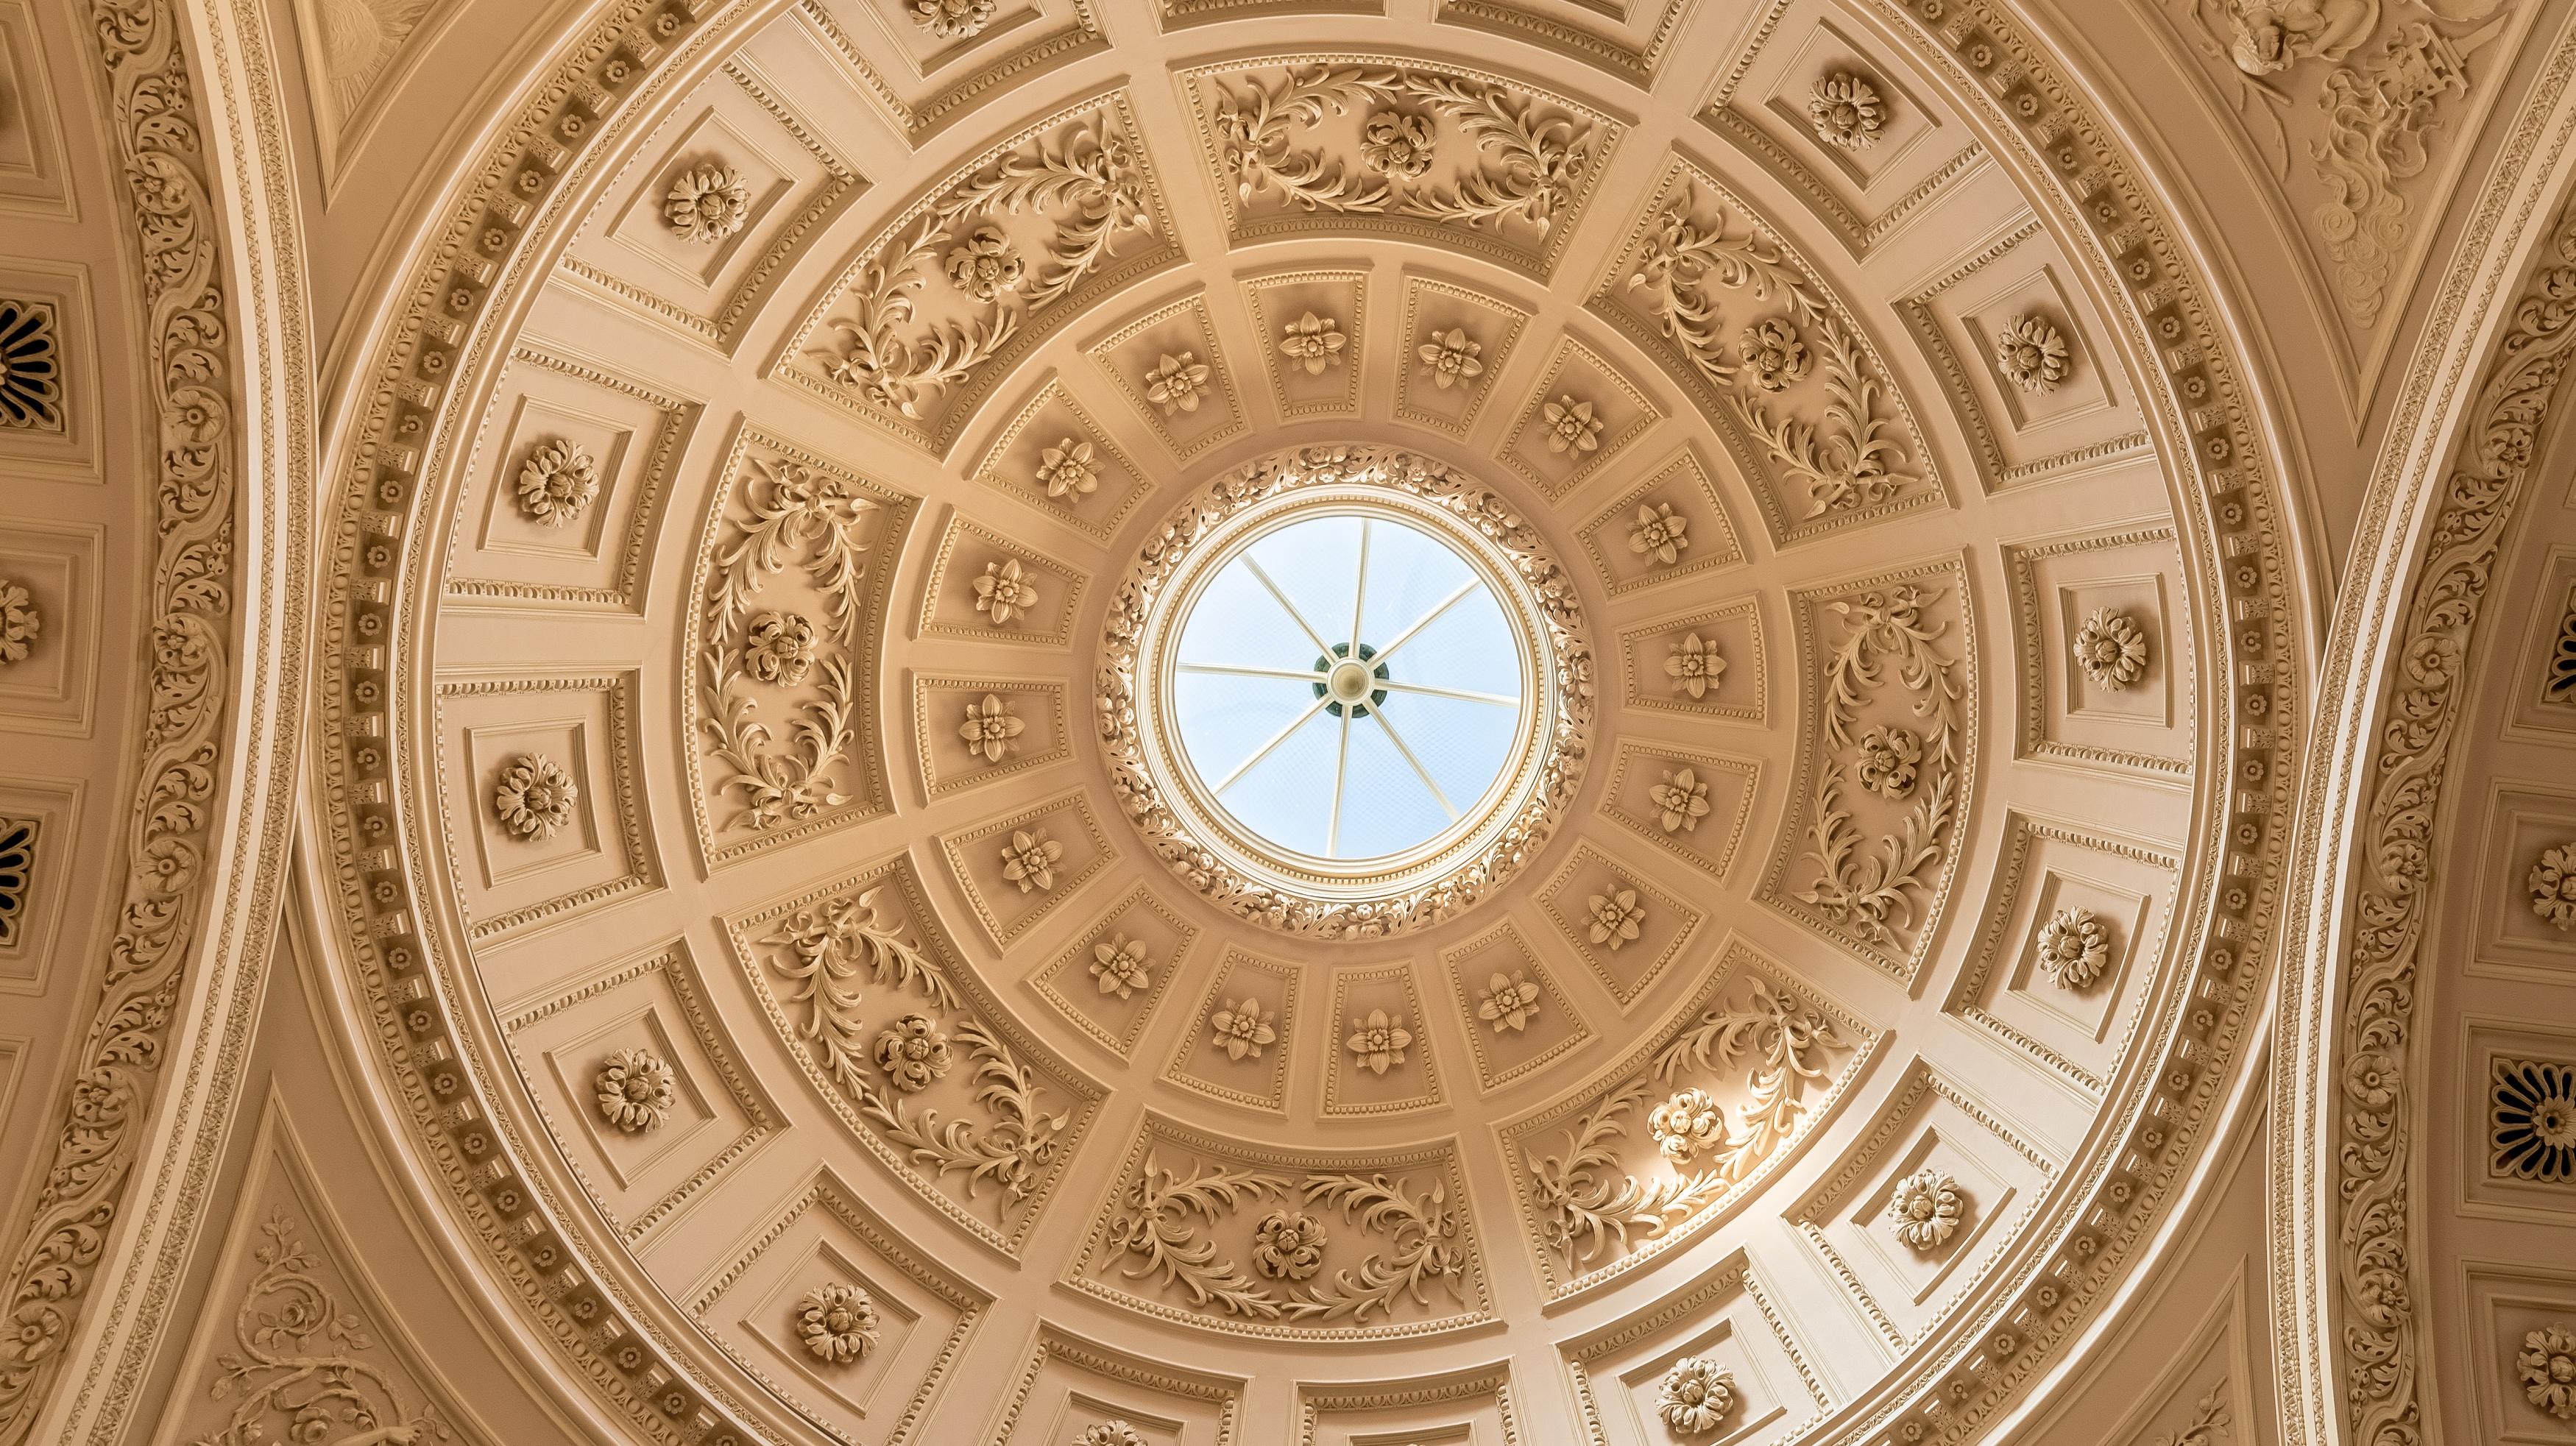 Image: Domed ceiling